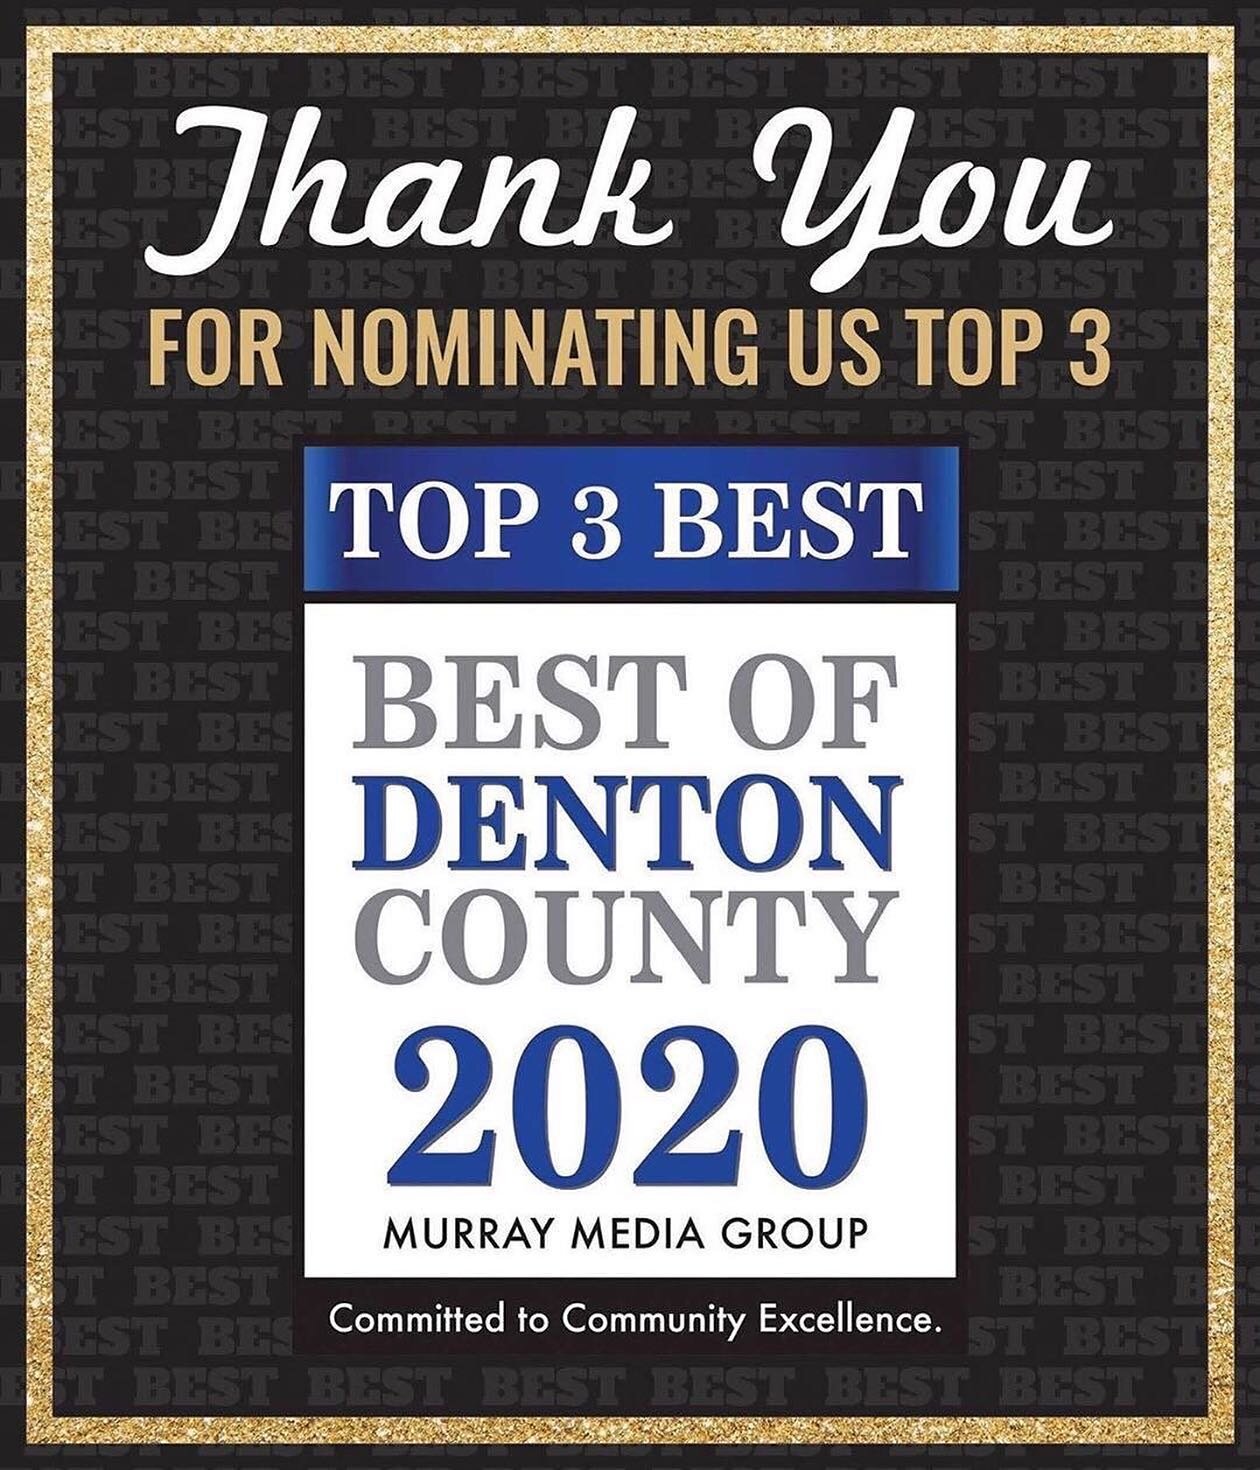 I made it to Top 3 Best of Denton County AGAIN!!! Please vote for me as the best of the best in the following categories: 

Couples &amp; Family Therapist - Brad Cullum, MA, LPC, EMDR

VOTE HERE:
https://bestofdentoncounty.com/medical-health/

 #dent